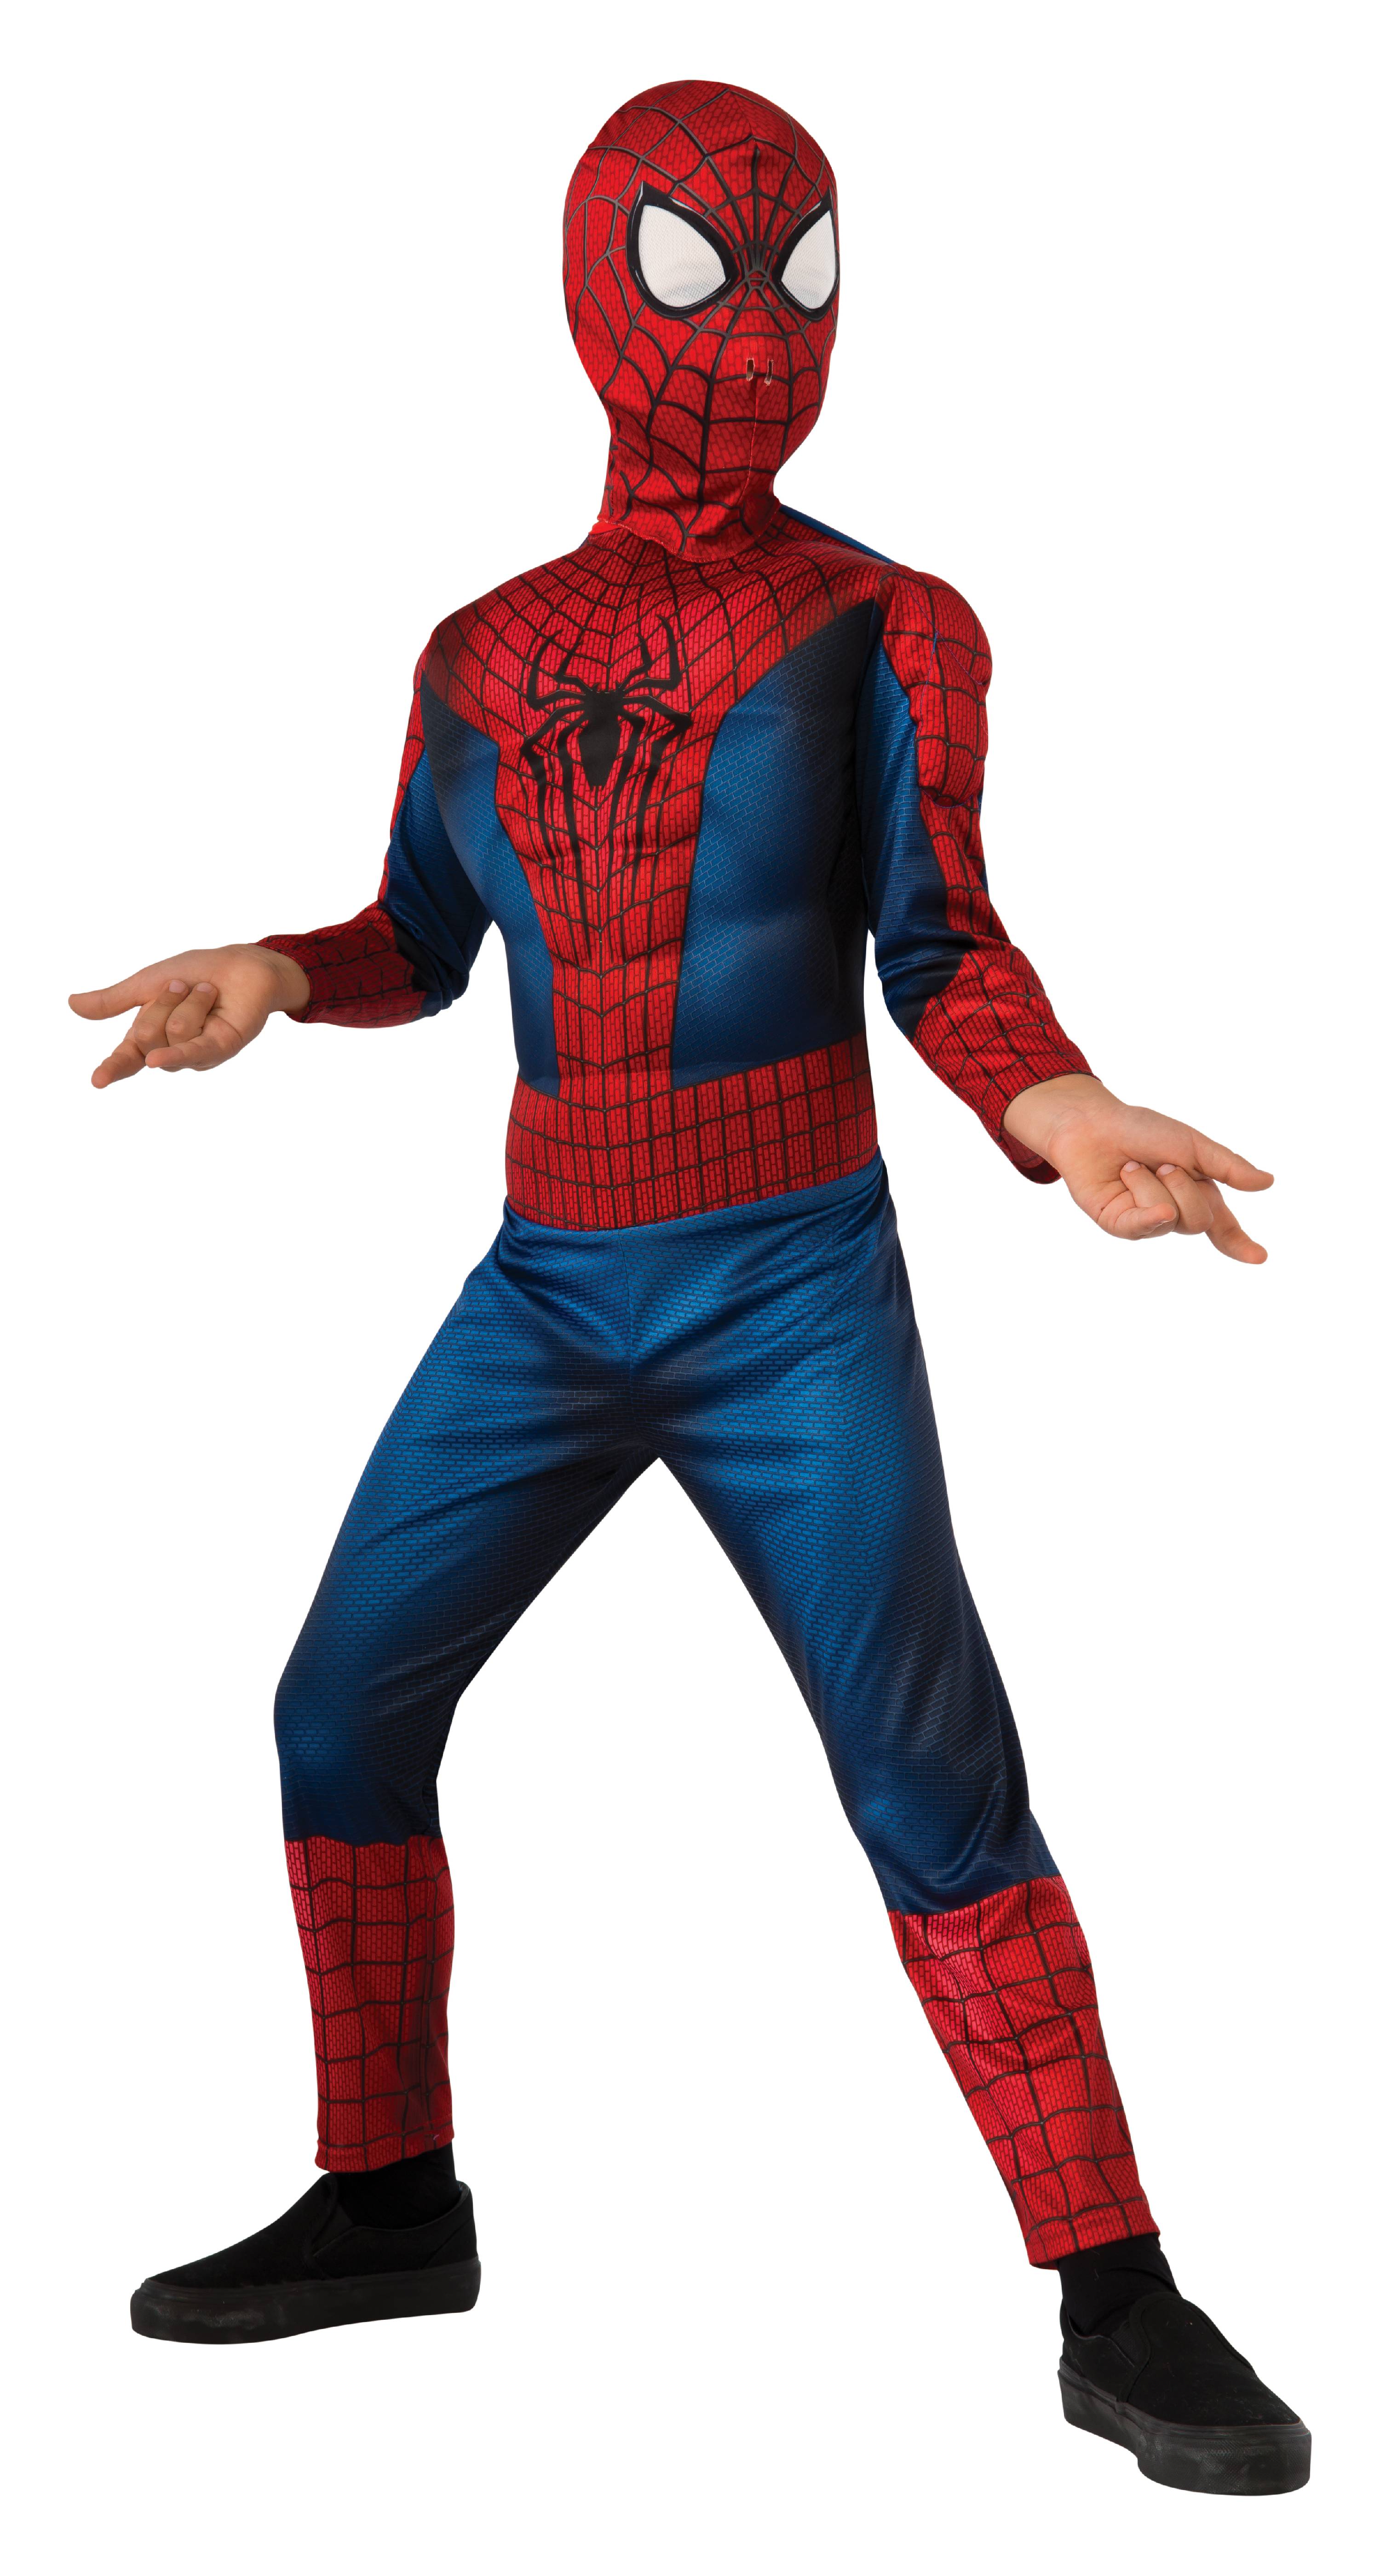 Rubie's Deluxe Spider-Man Boy's Halloween Fancy-Dress Costume for Child, M - image 1 of 2